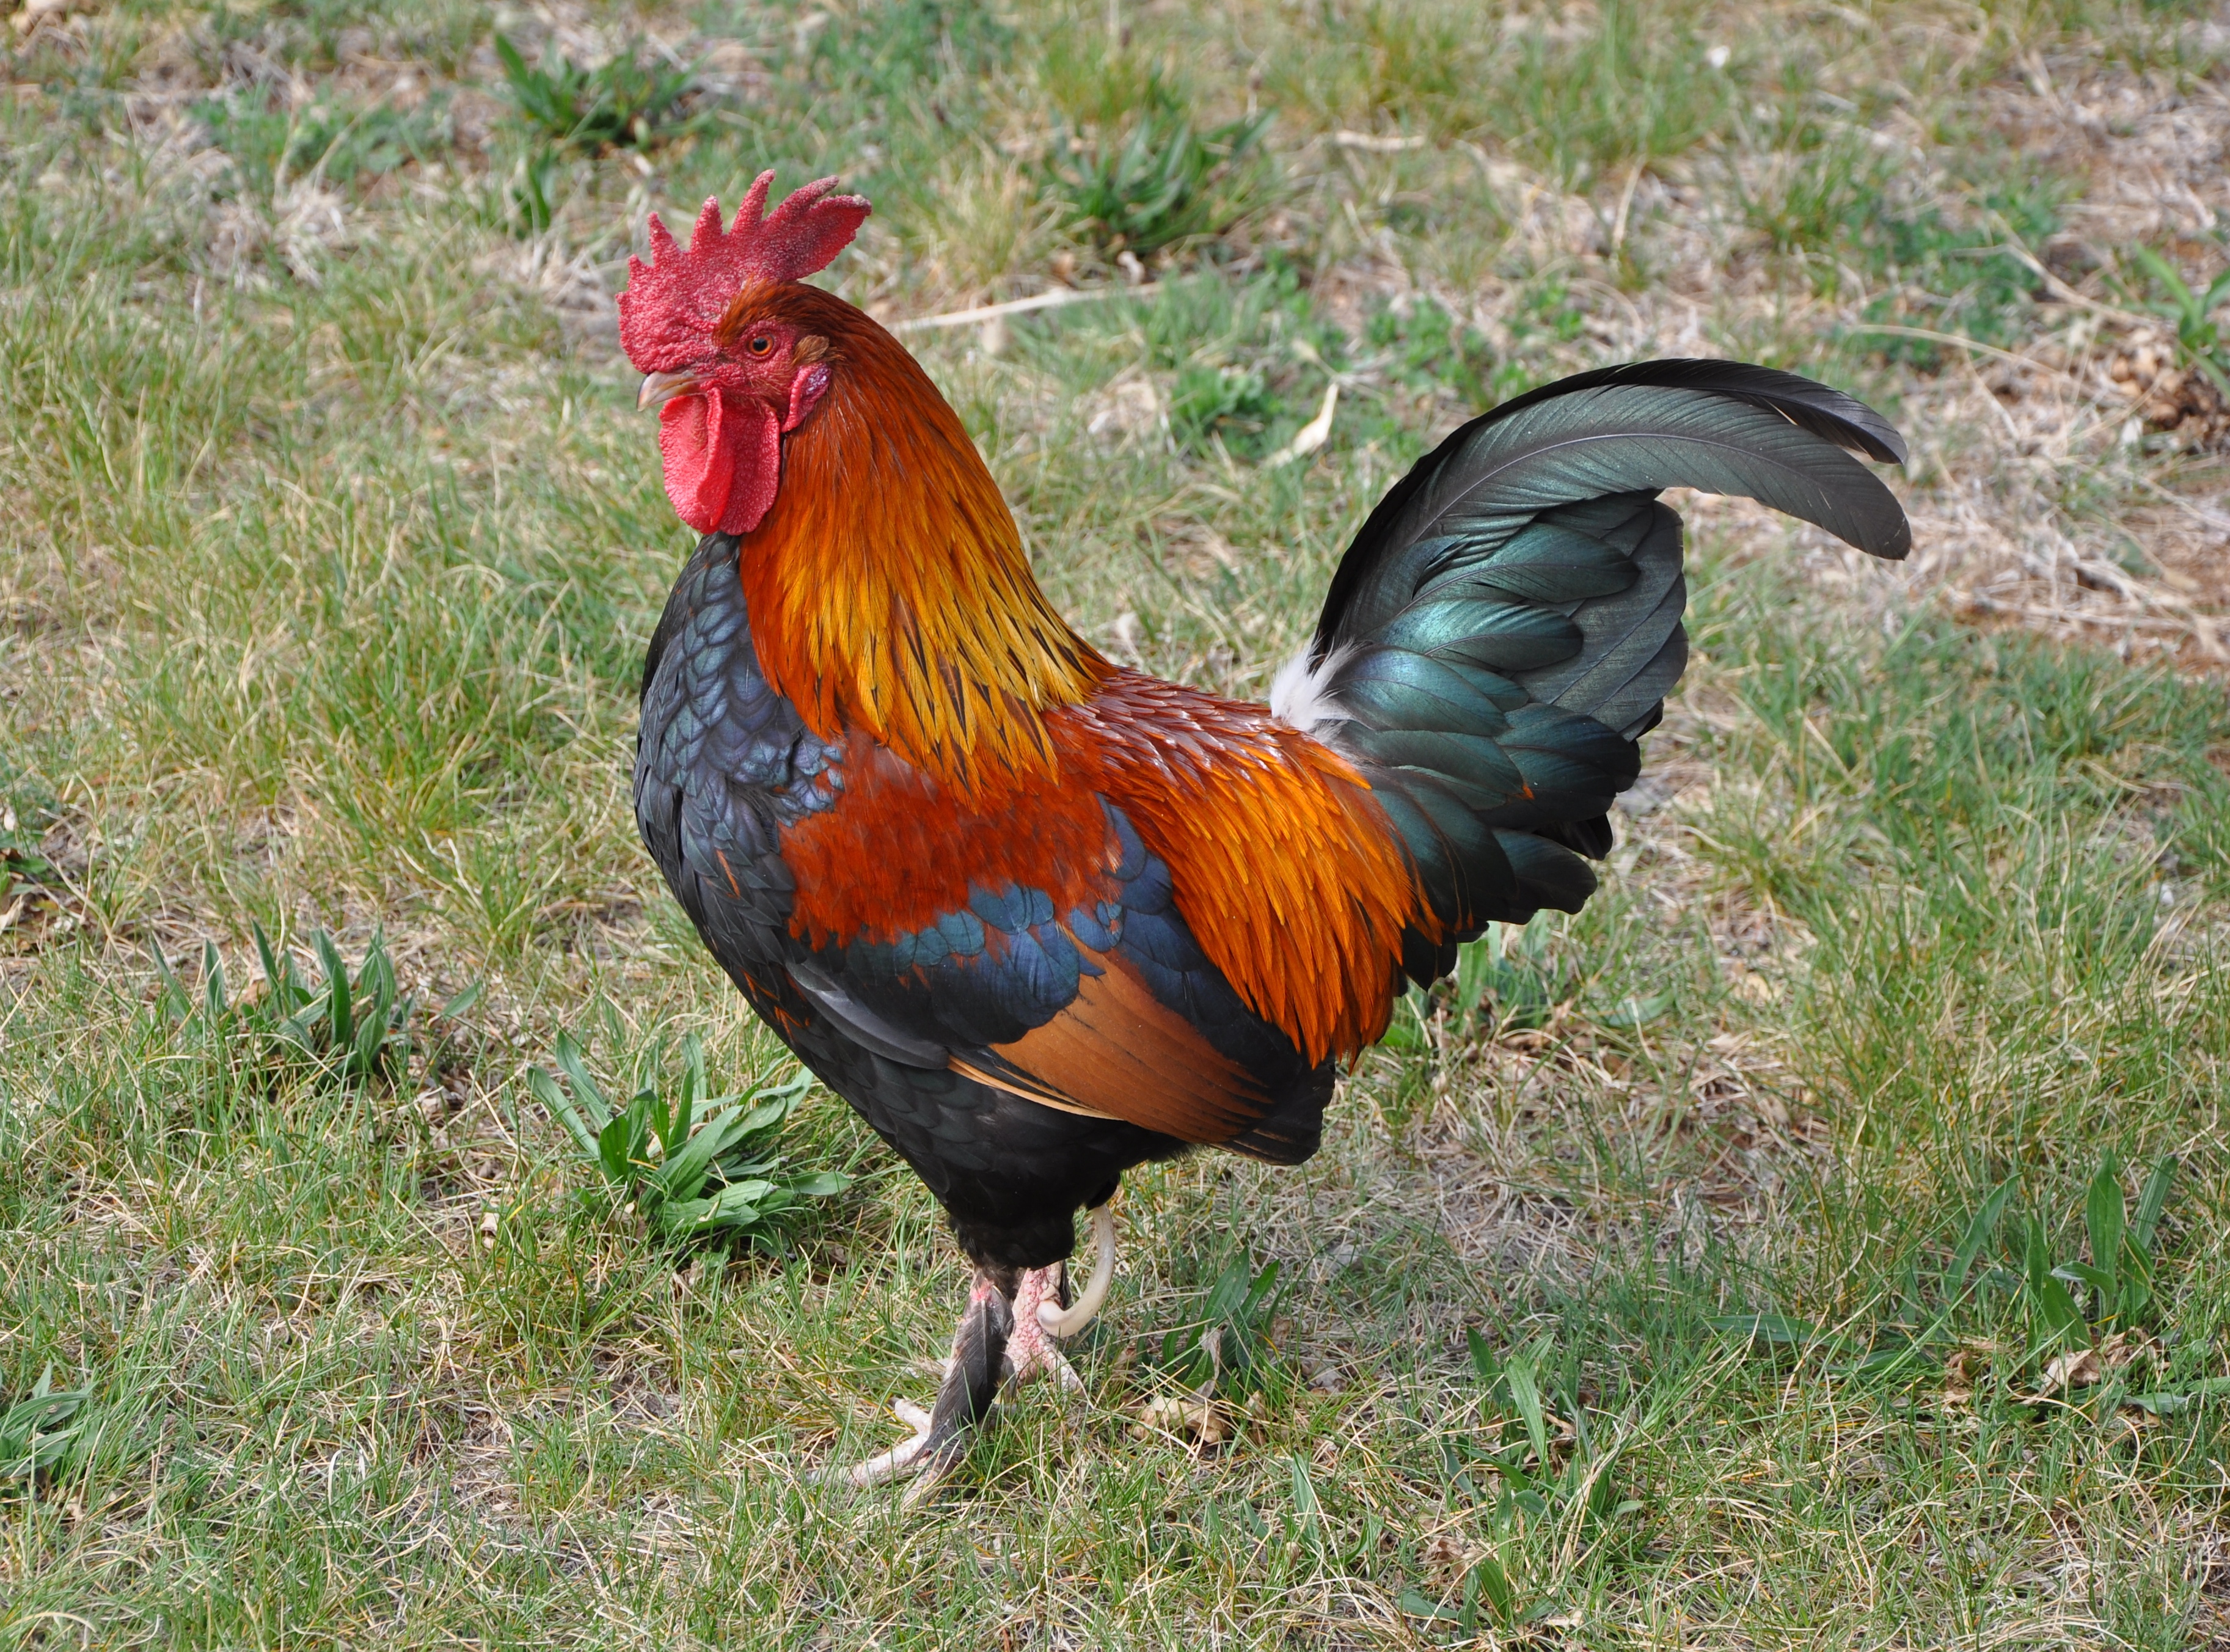 File:Rooster-1.jpg - Wikimedia Commons